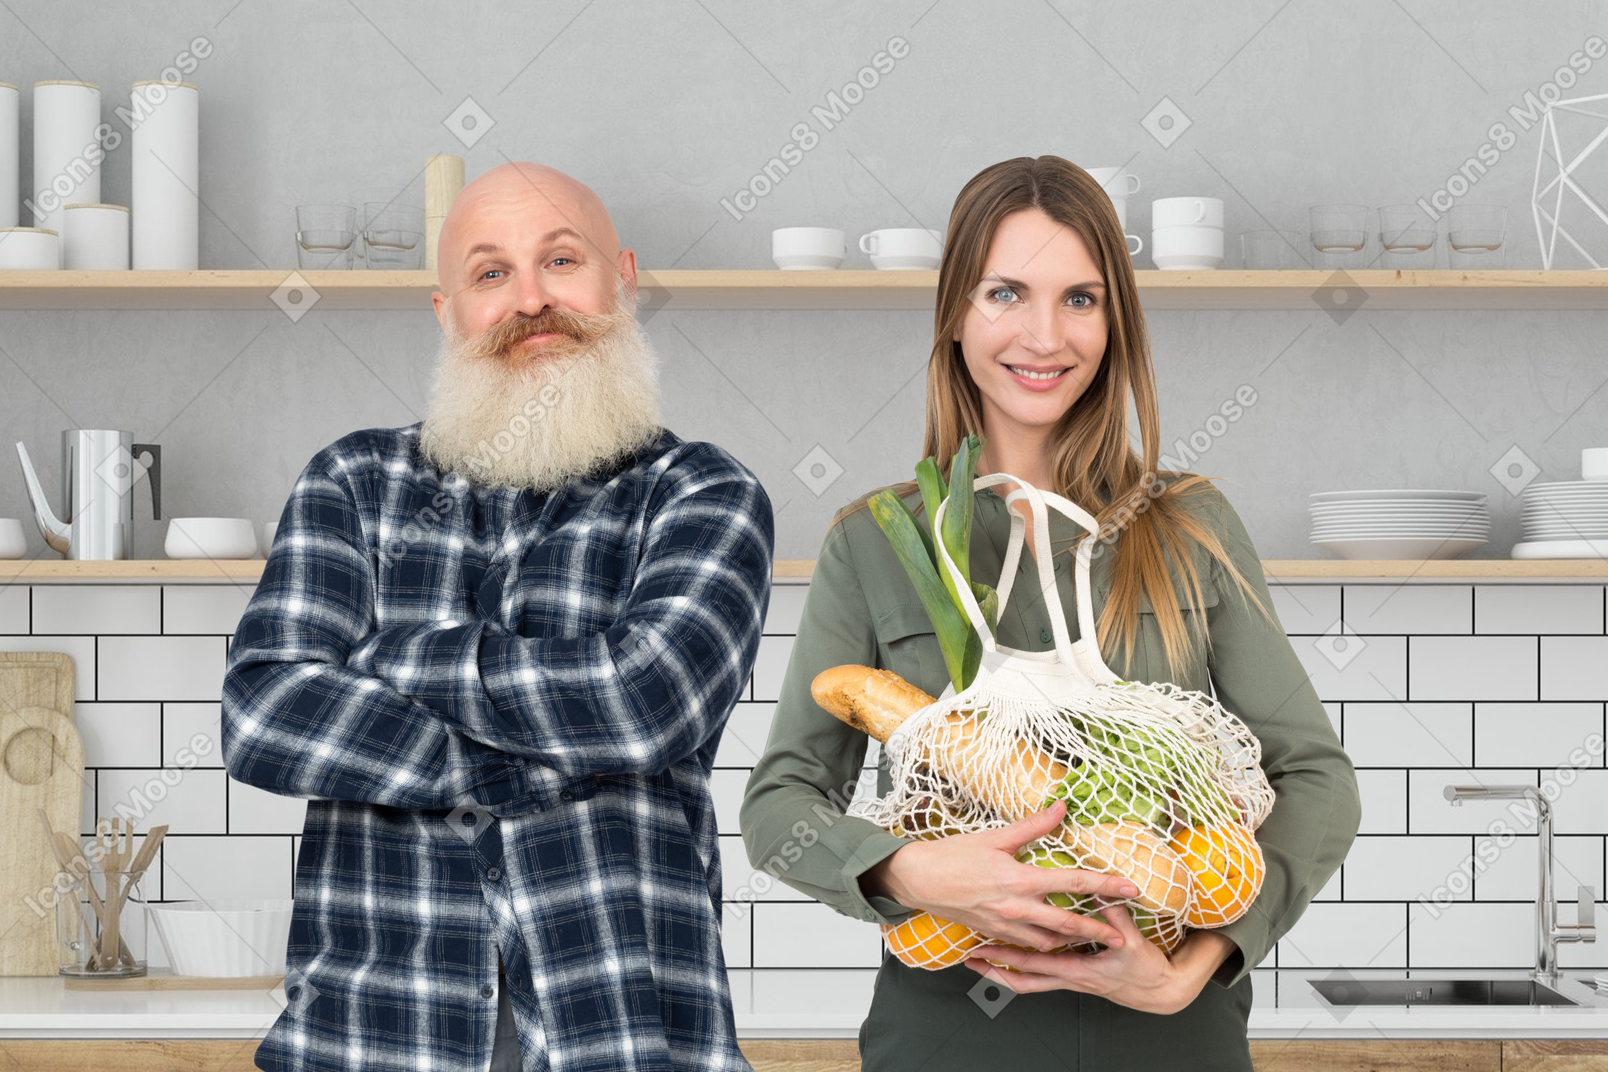 A man and a woman standing in a kitchen